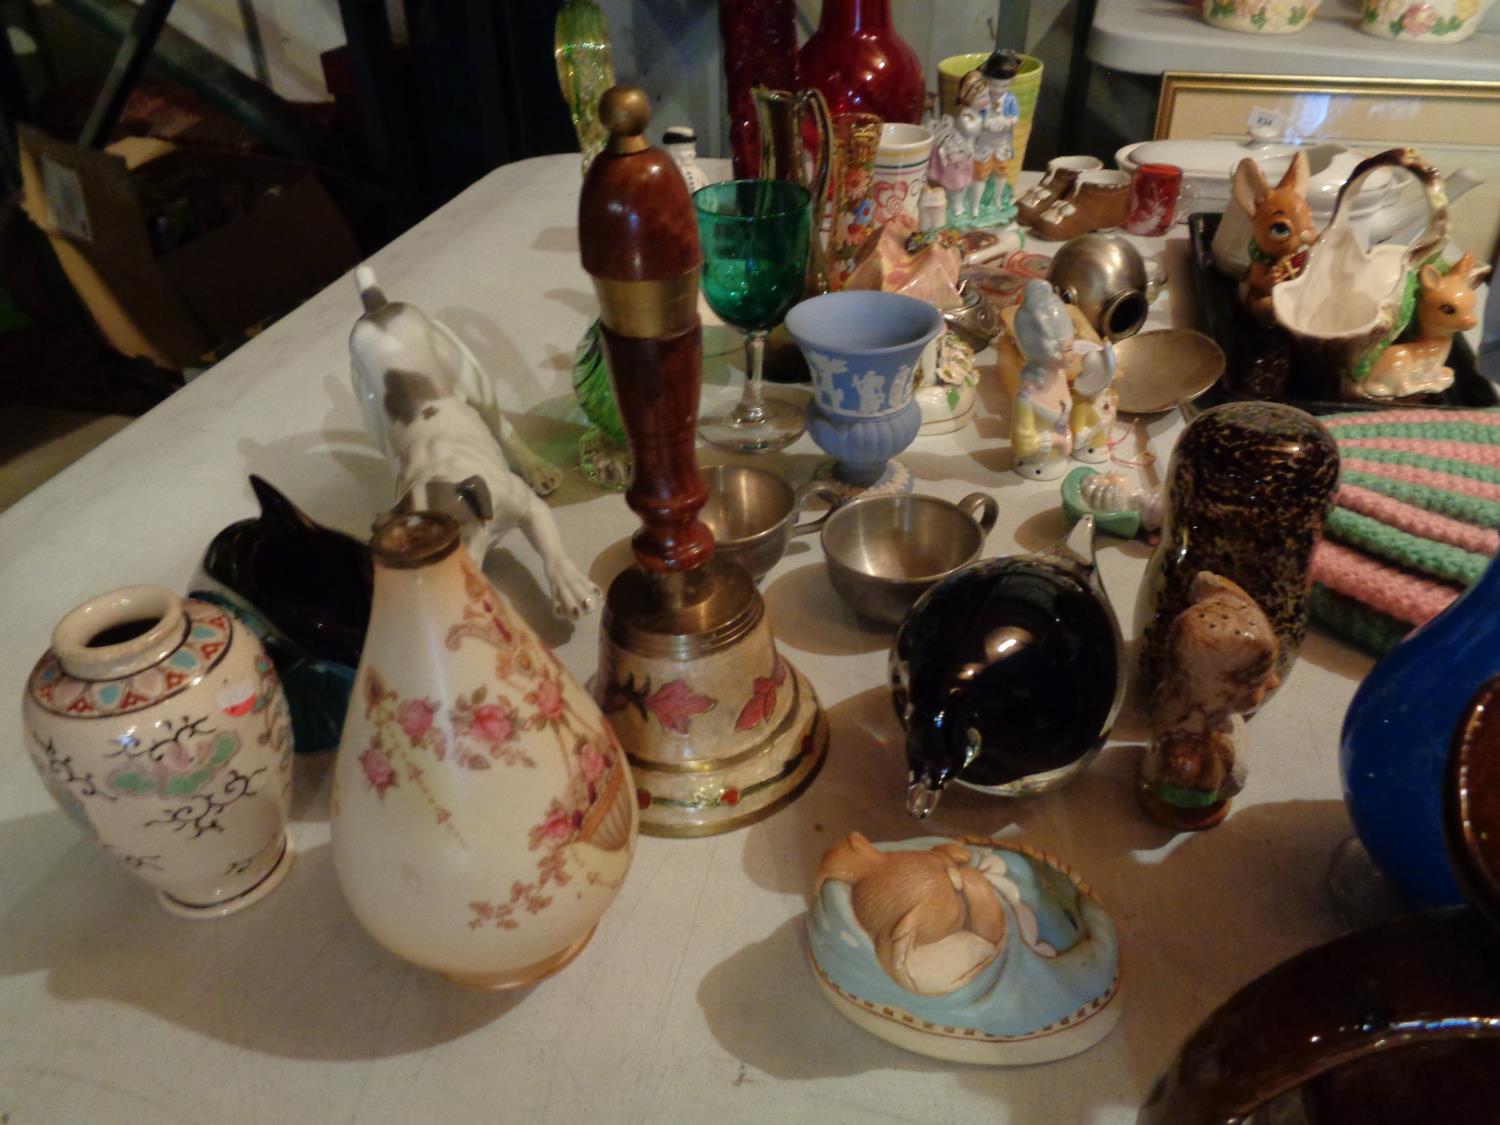 A MIXED SELECTION OF ITEMS TO INCLUDE SMALL VASES, A TRINKET TRAY AND SOME CERAMIC ITEMS - Image 3 of 5